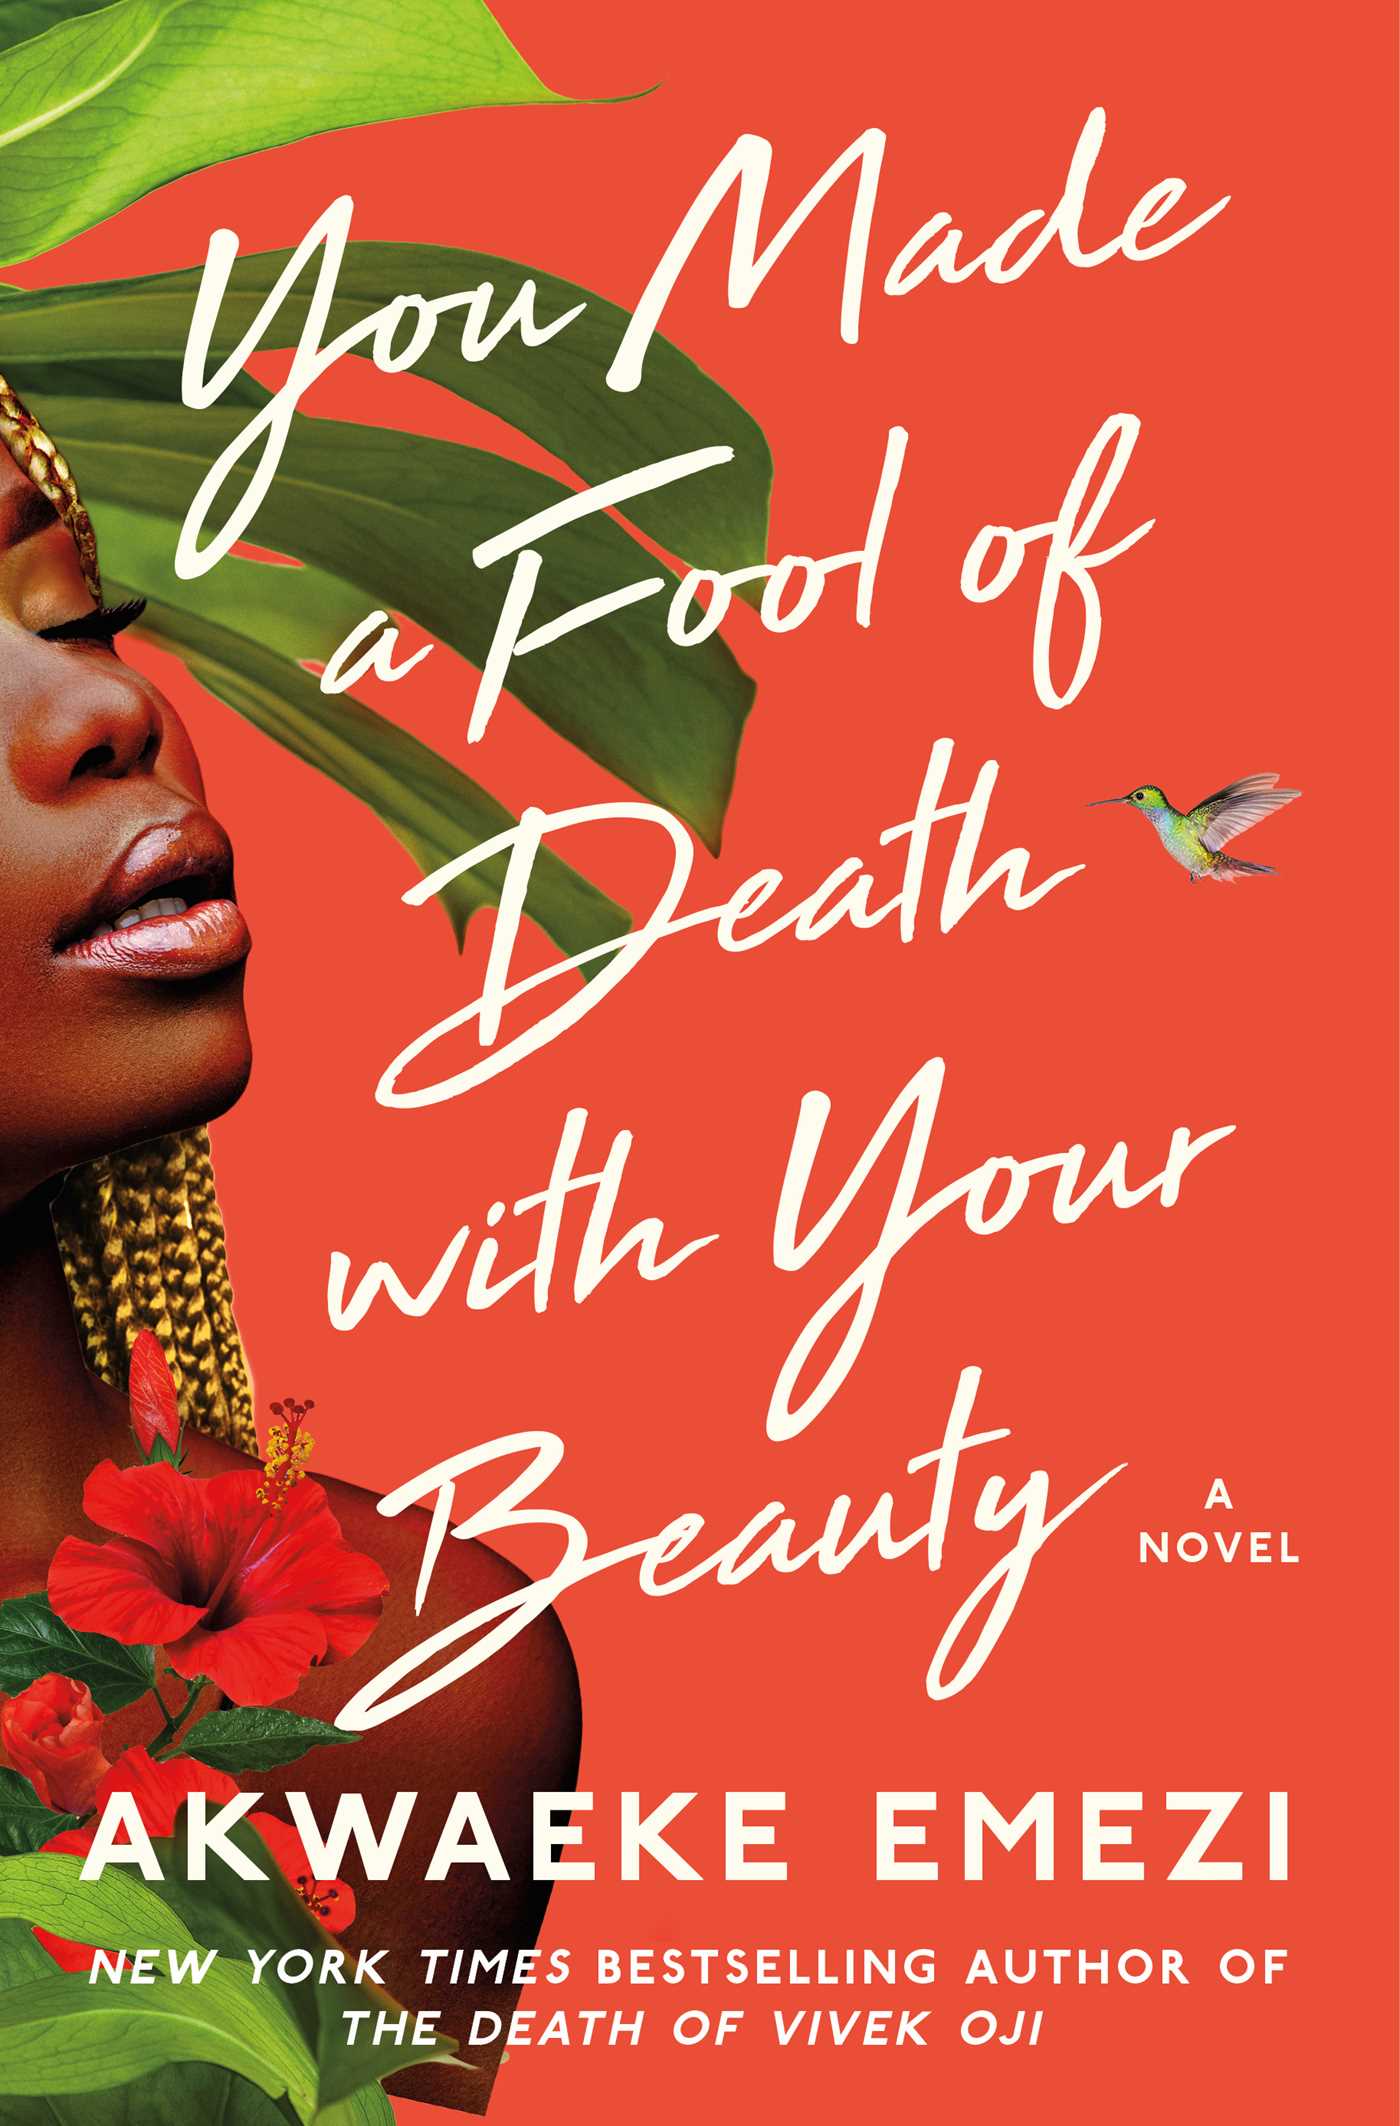 Akwaeke Emezi: You Made a Fool of Death with Your Beauty (2022, Faber & Faber, Limited)